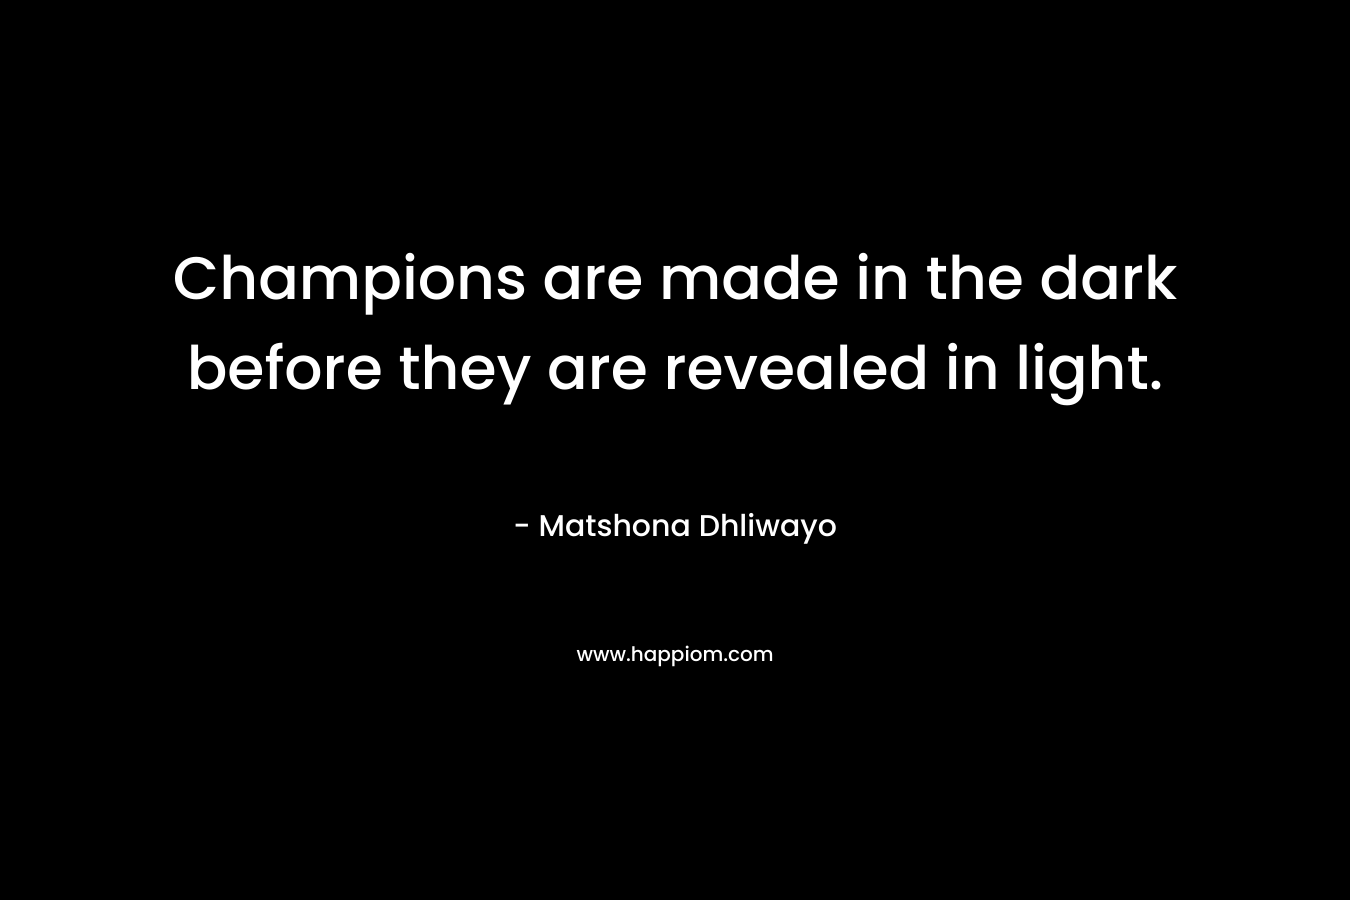 Champions are made in the dark before they are revealed in light.